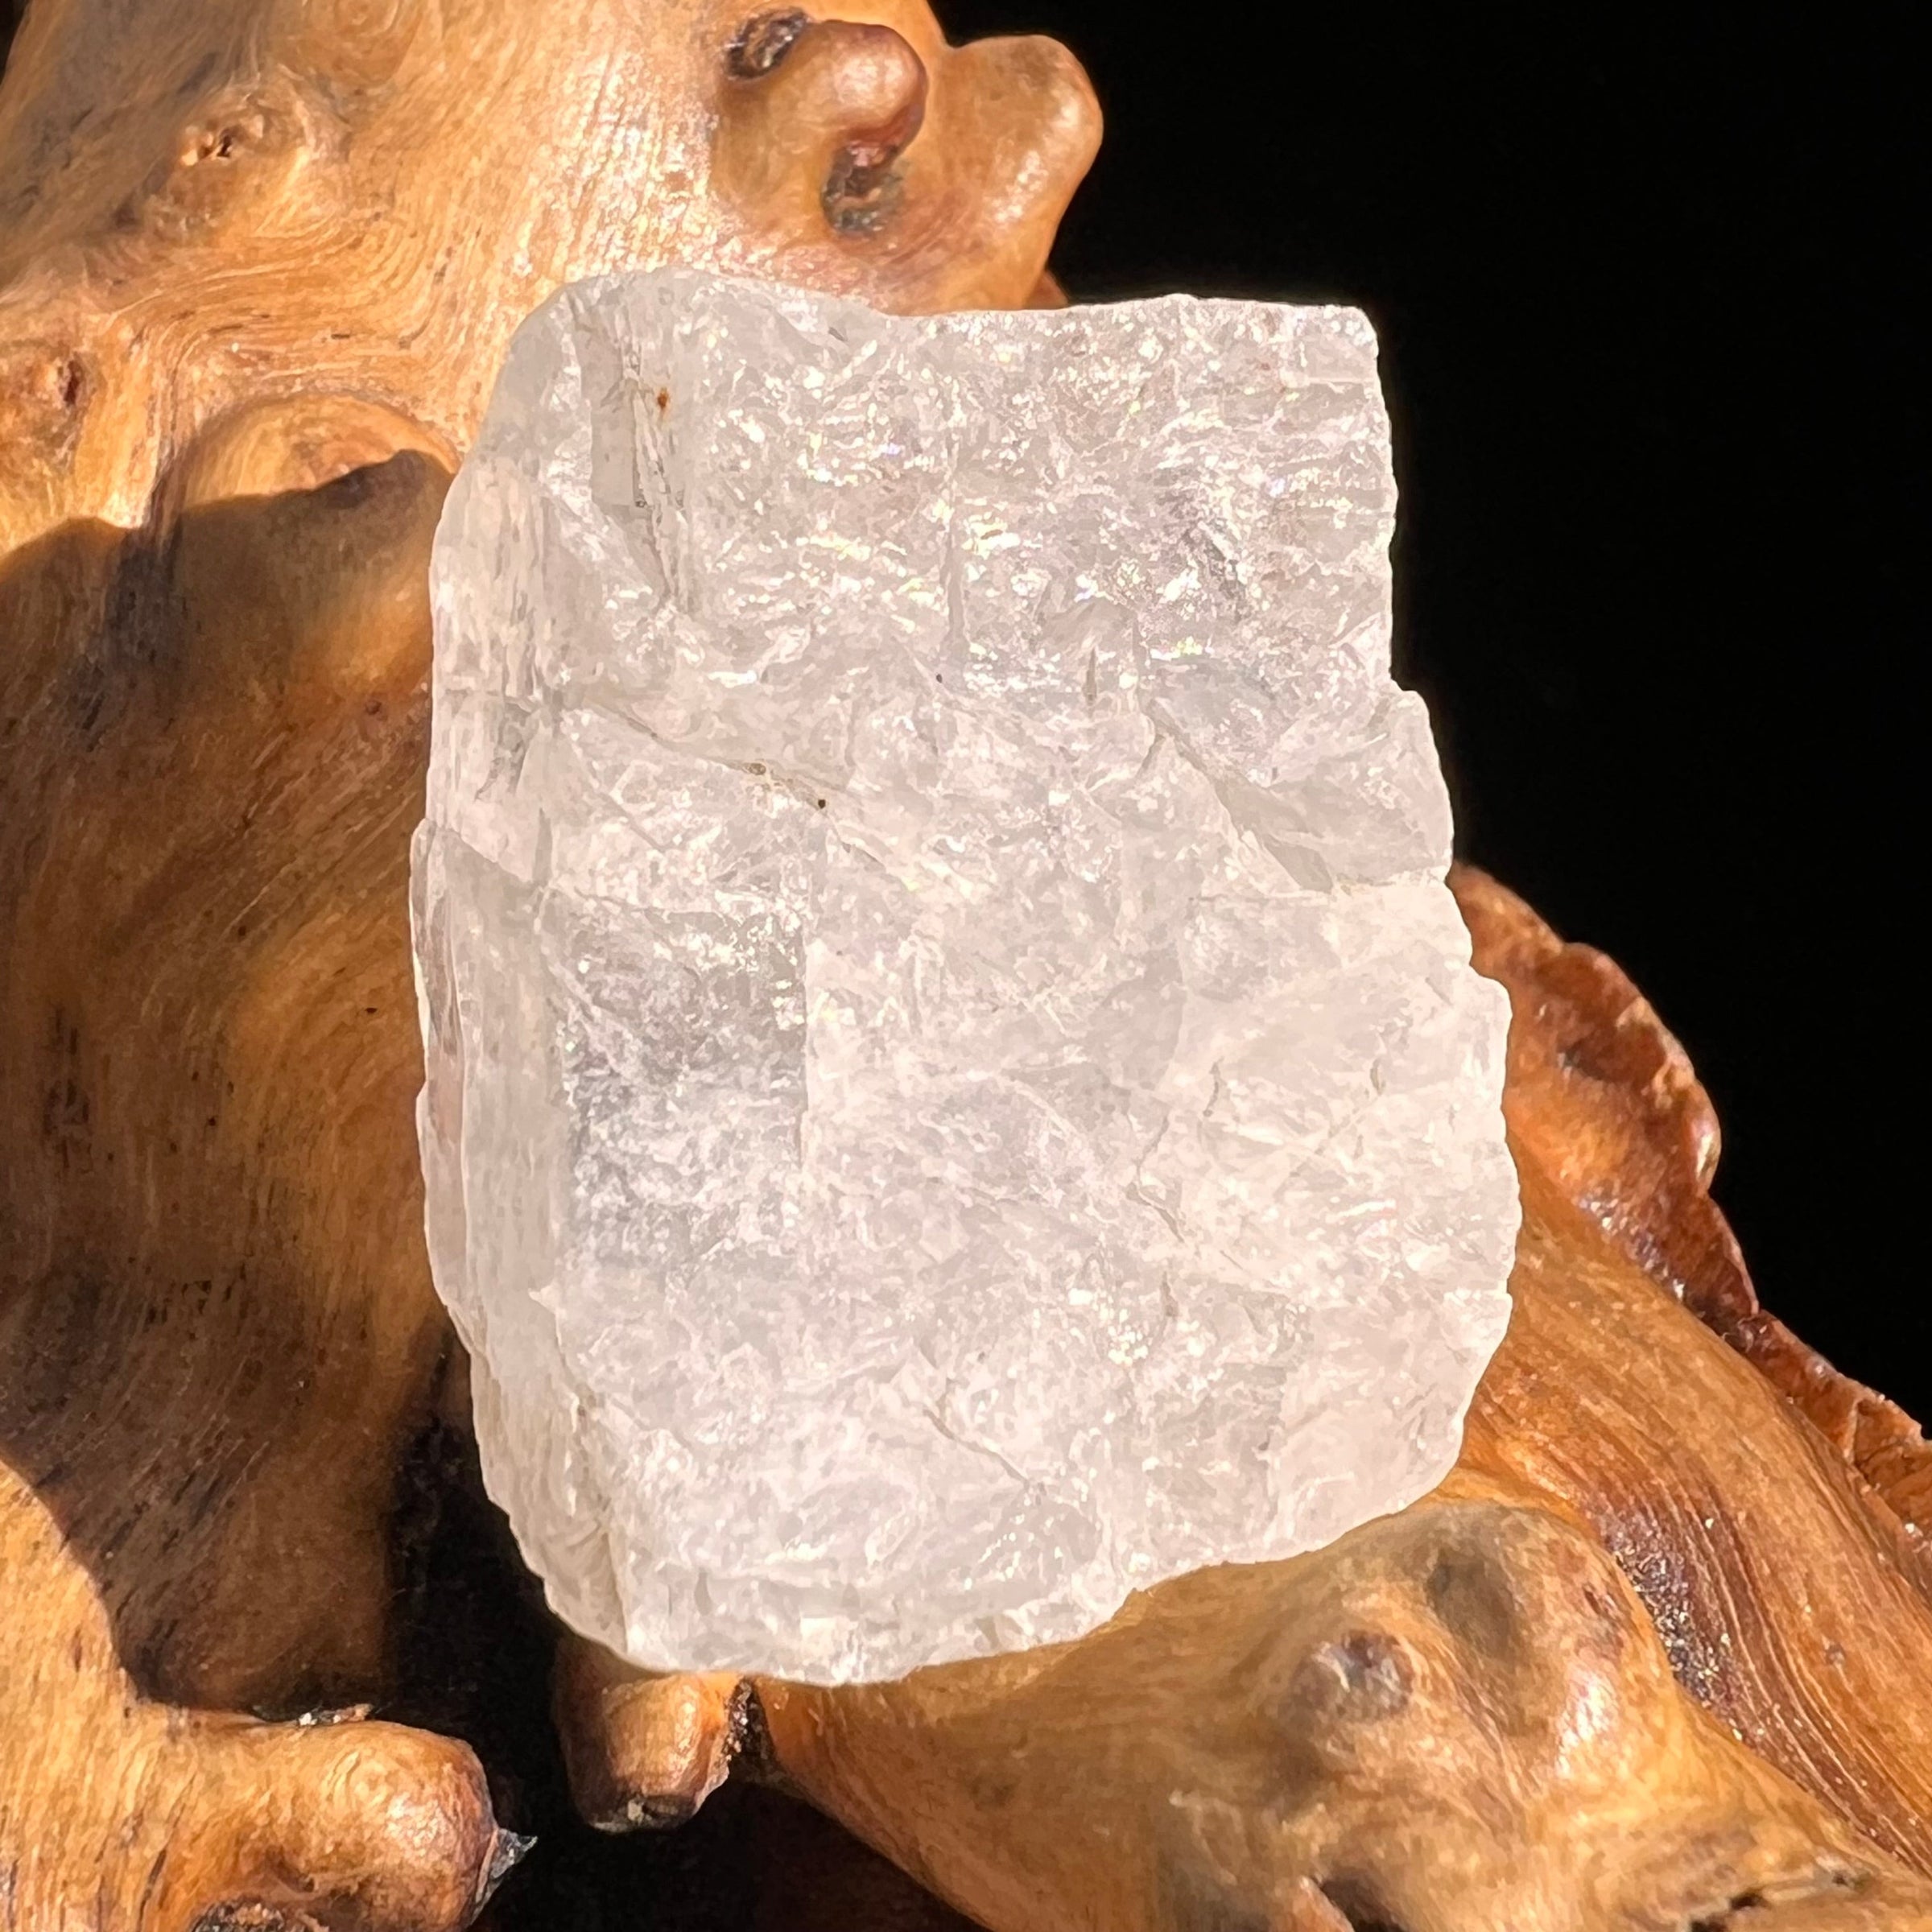 Petalite Crystal "Stone of the Angels" #4